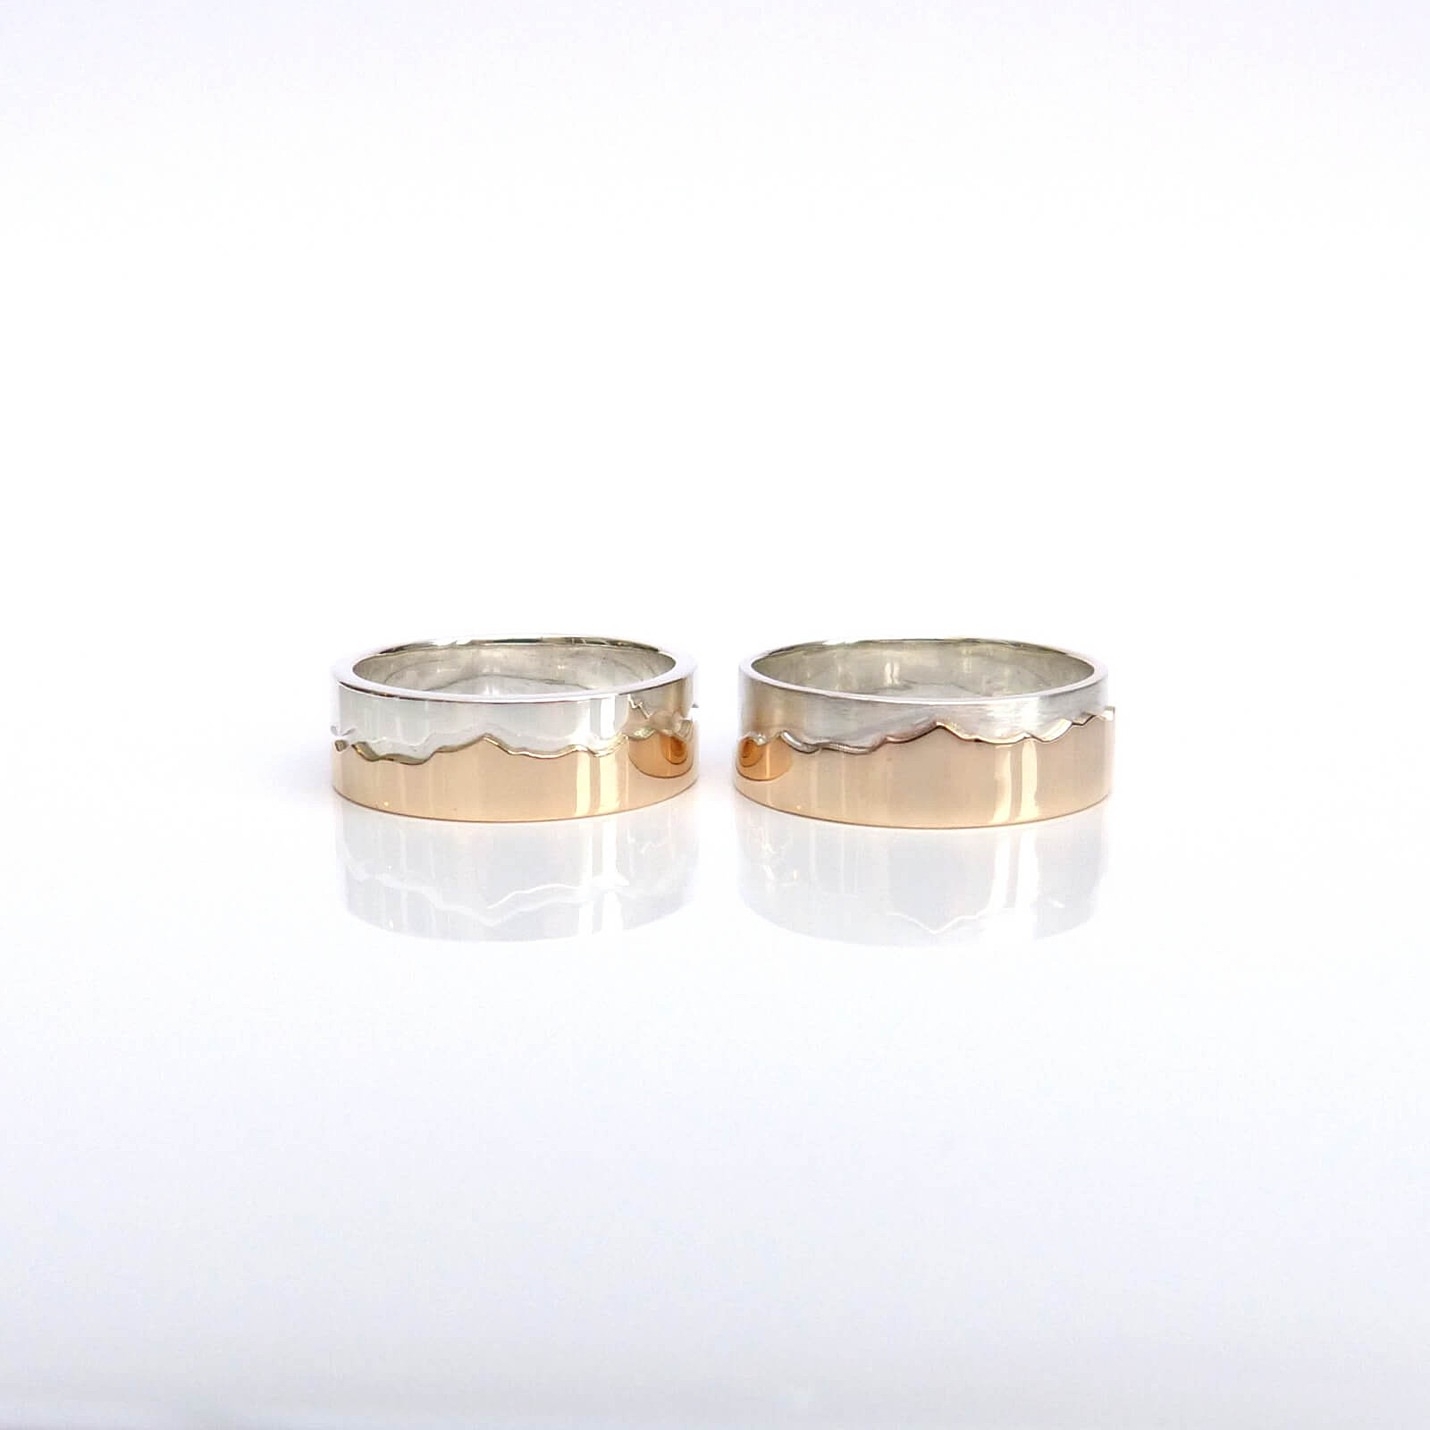 two bespoke wedding rings which are rose gold and silver with outline of mountain range around the rings jen cunningham bespoke wedding jewellery scotland